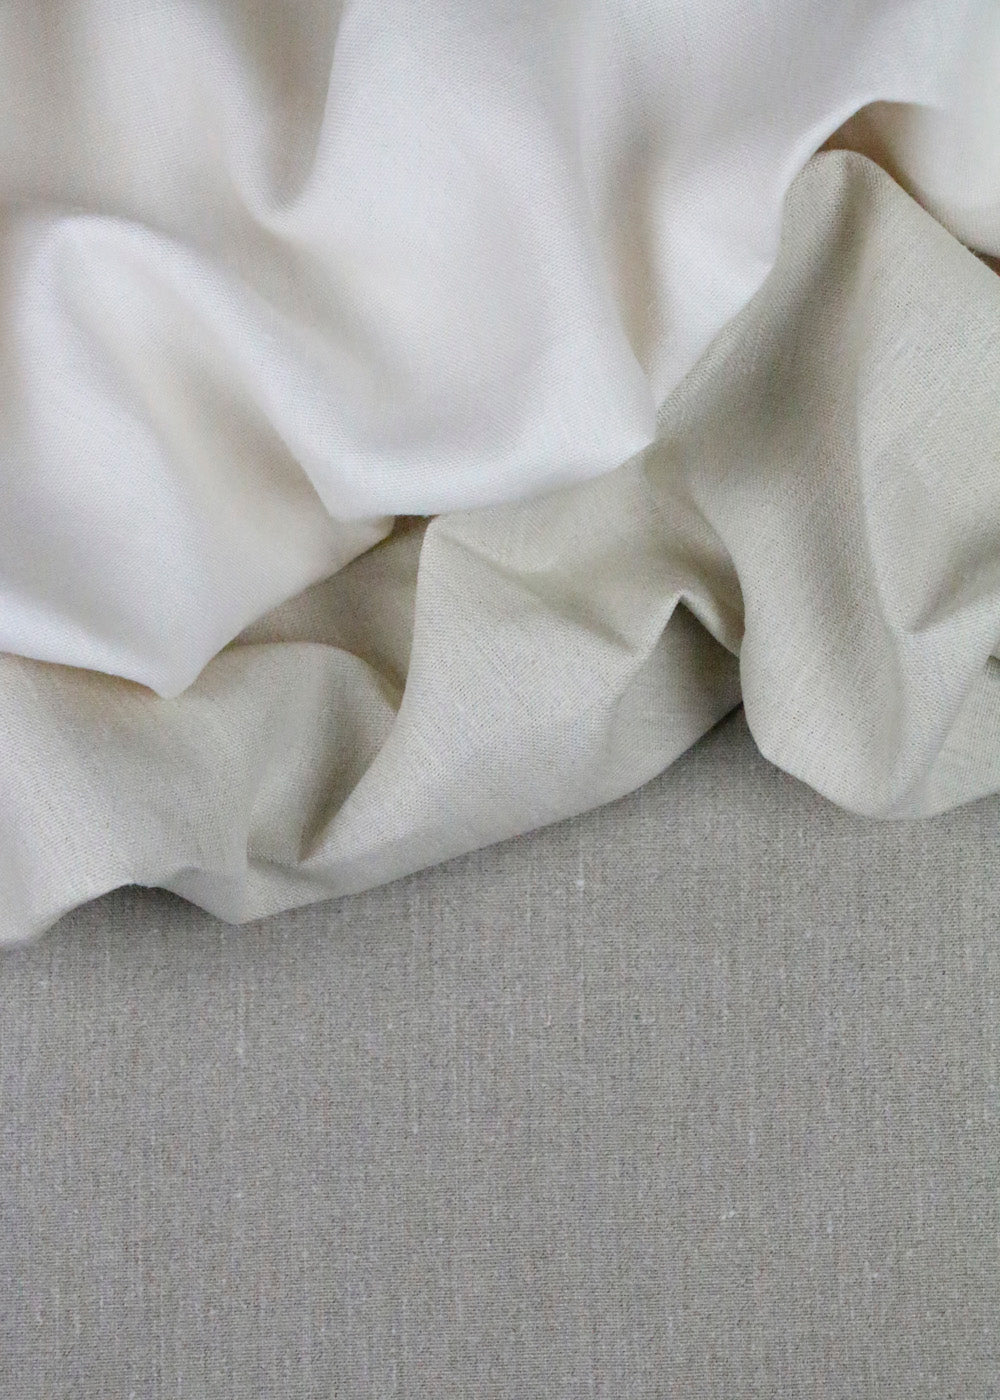 crumpled linen fabric in white, grey, and oatmeal colors